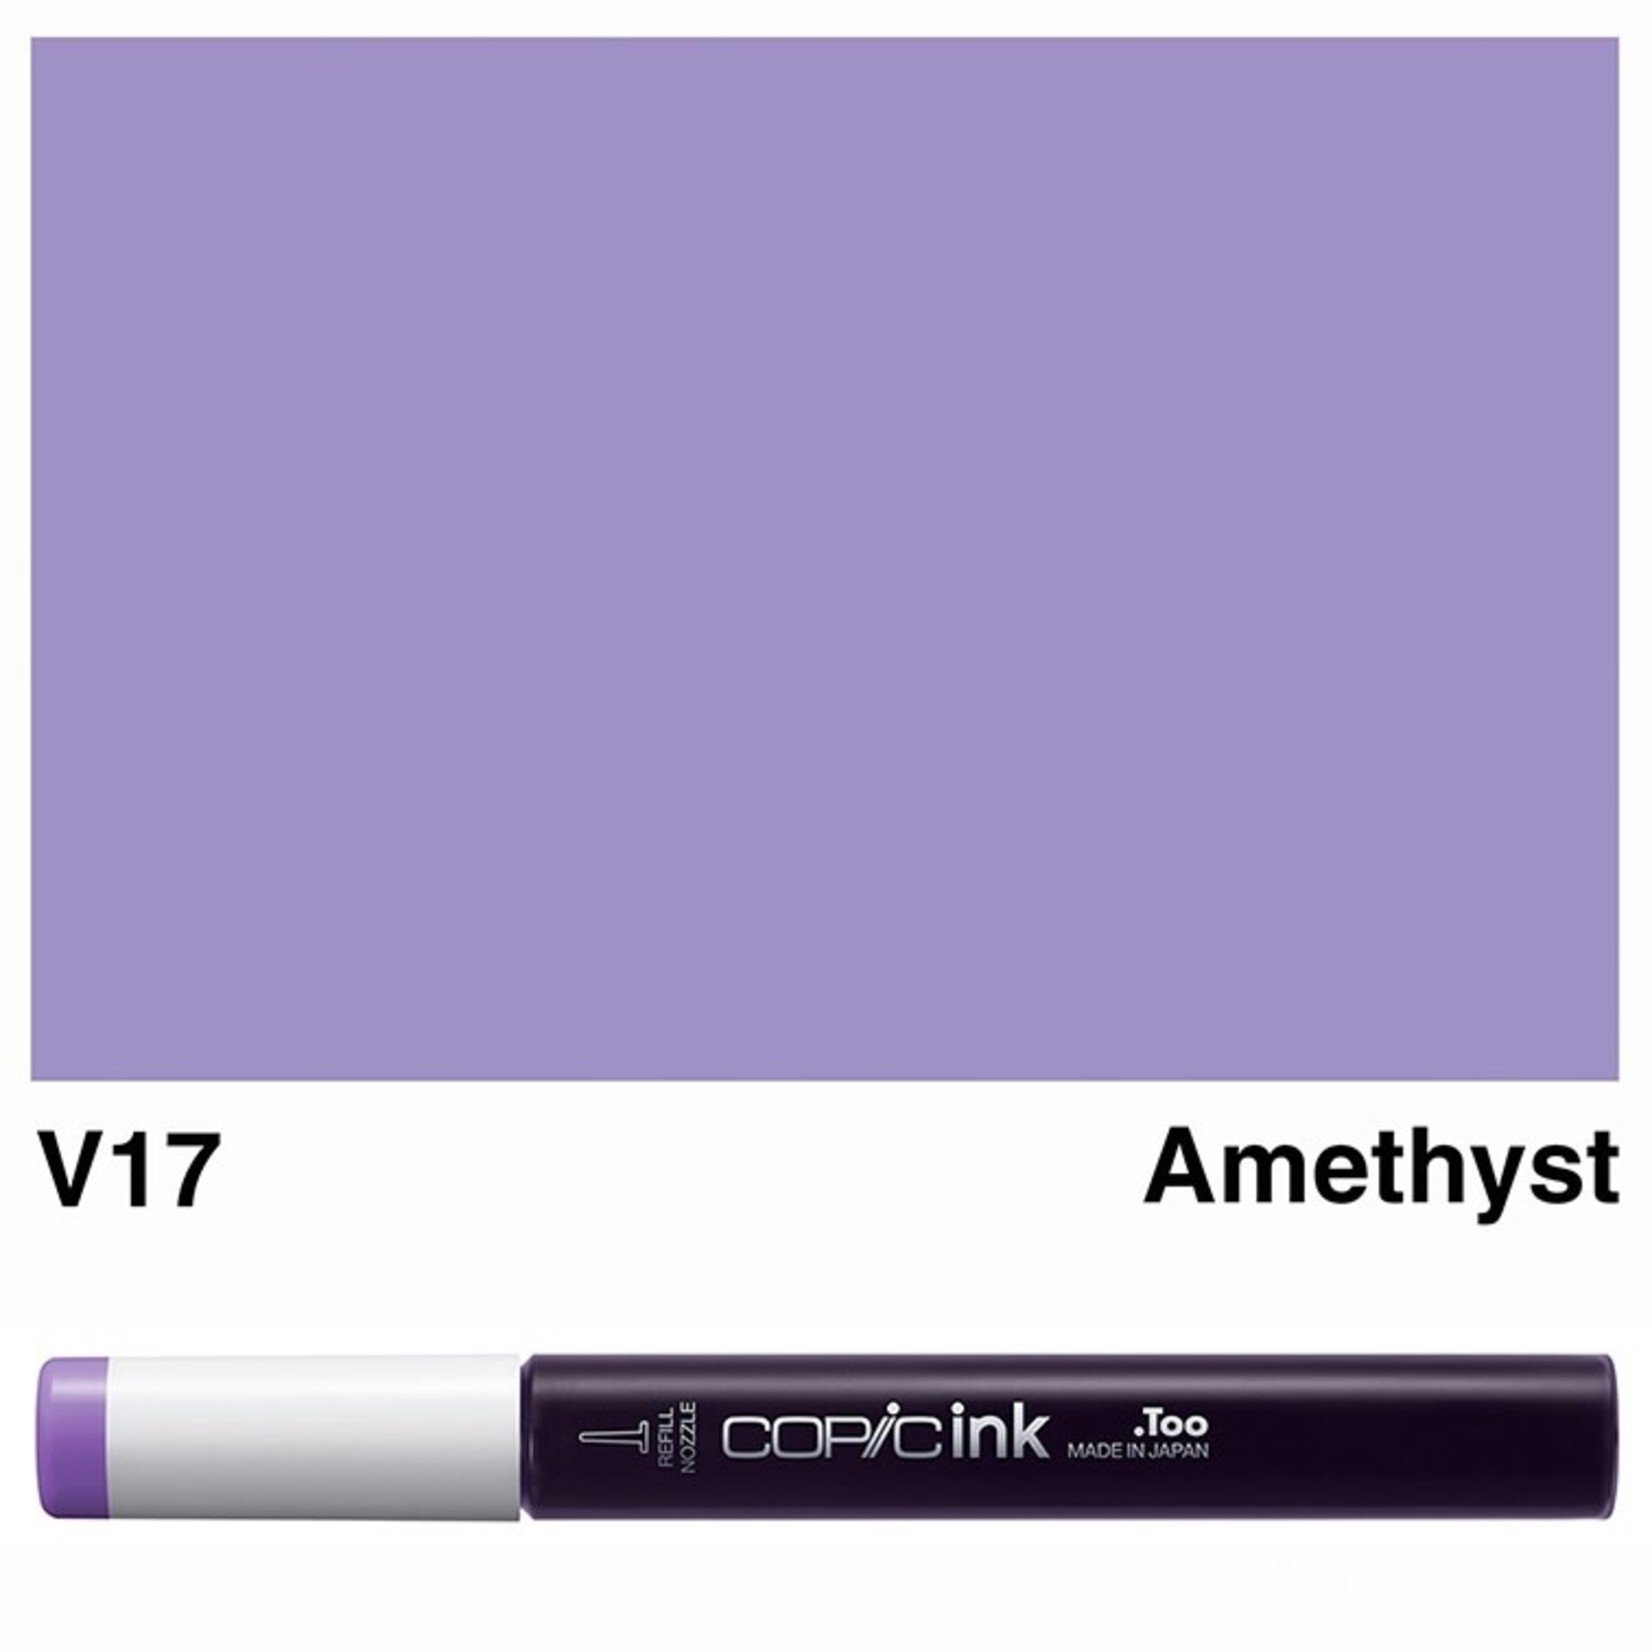 Copic Copic Various Ink V17 Amethyst